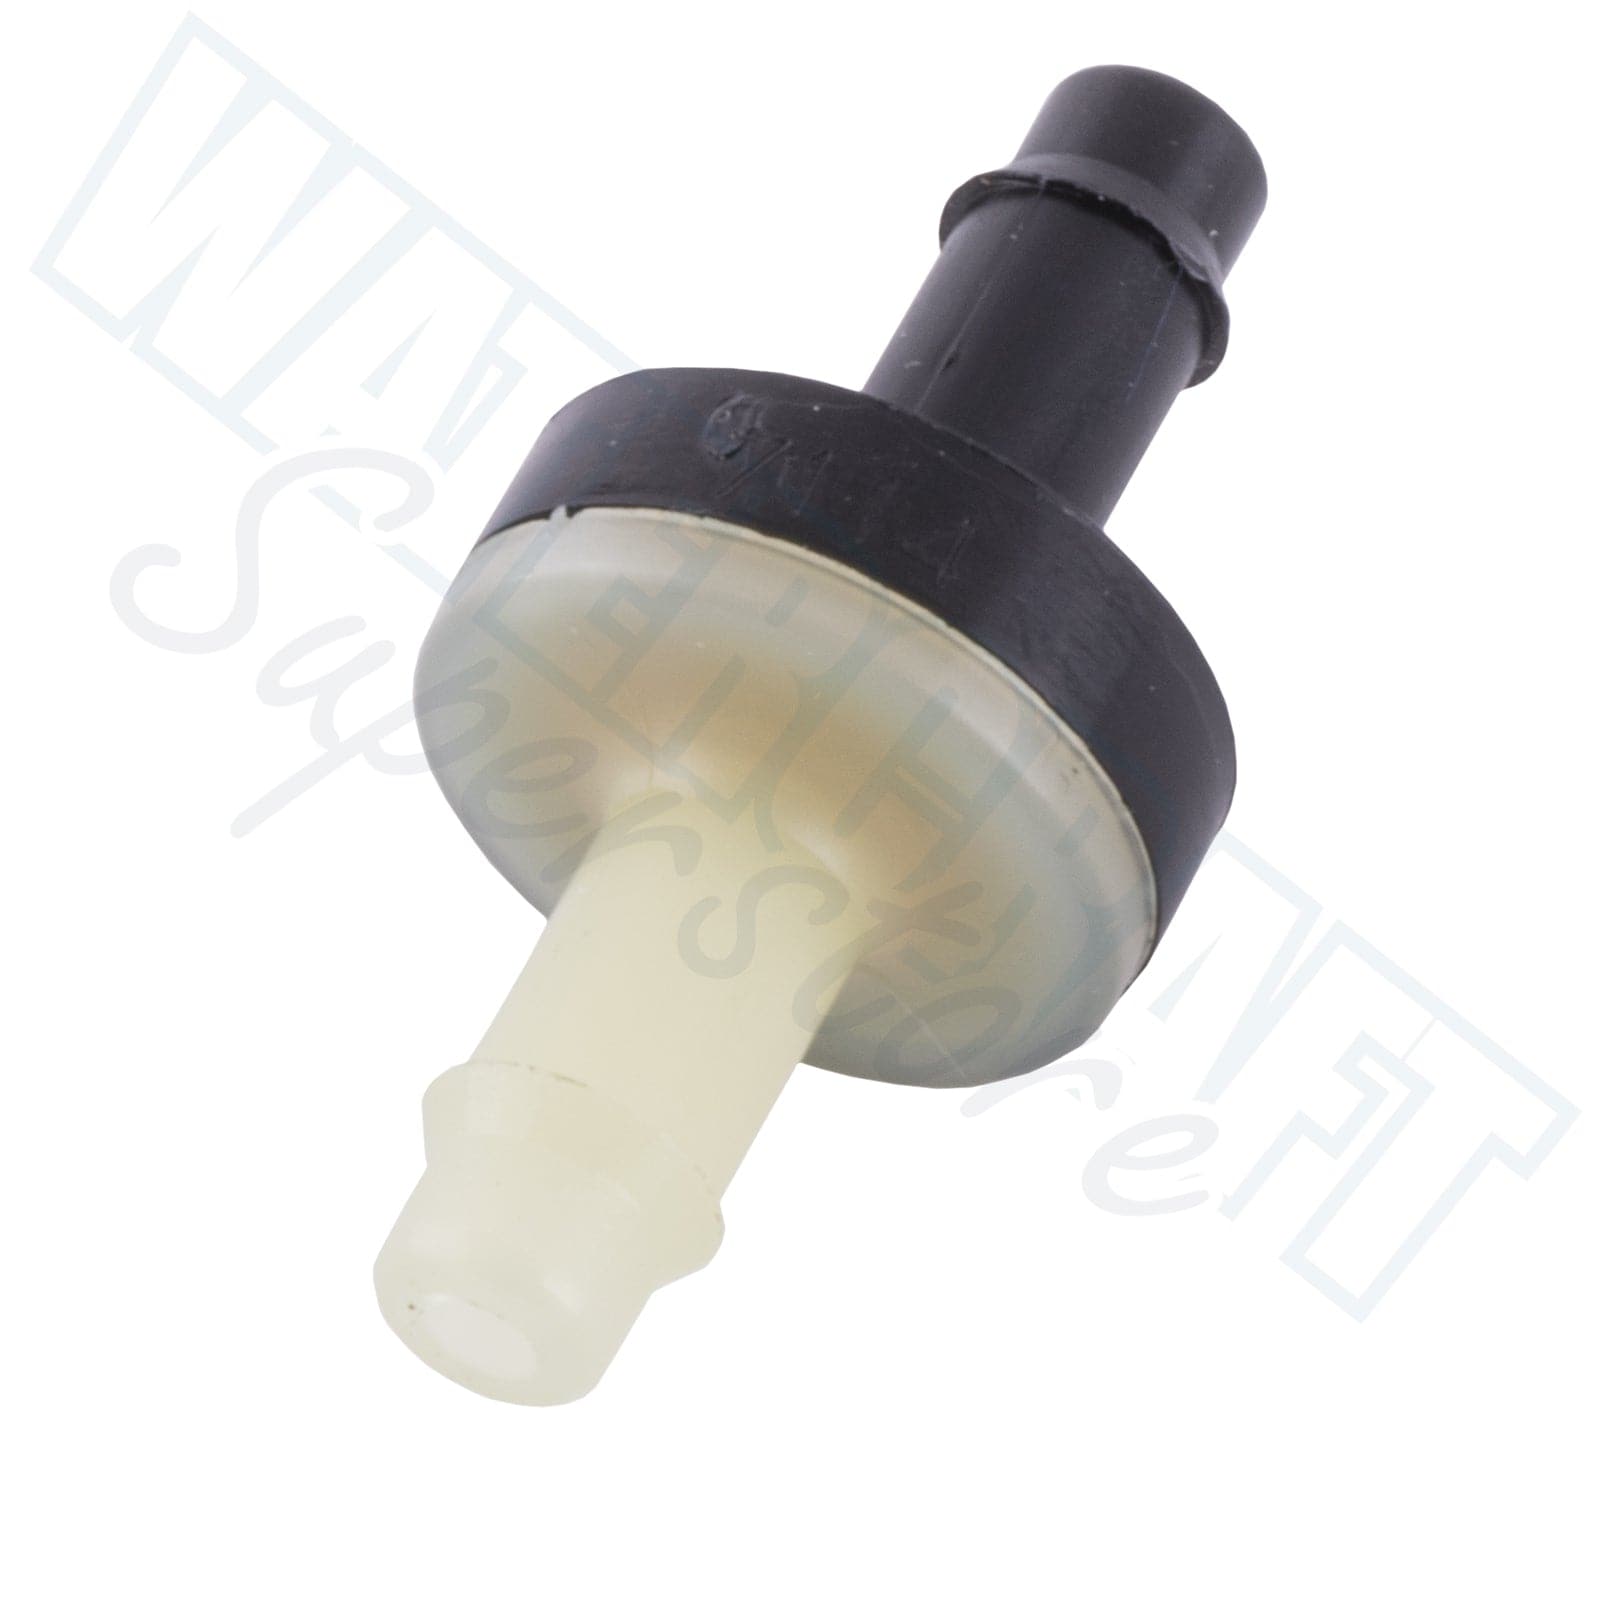 Check Valve for 1/4 inch Fuel Line